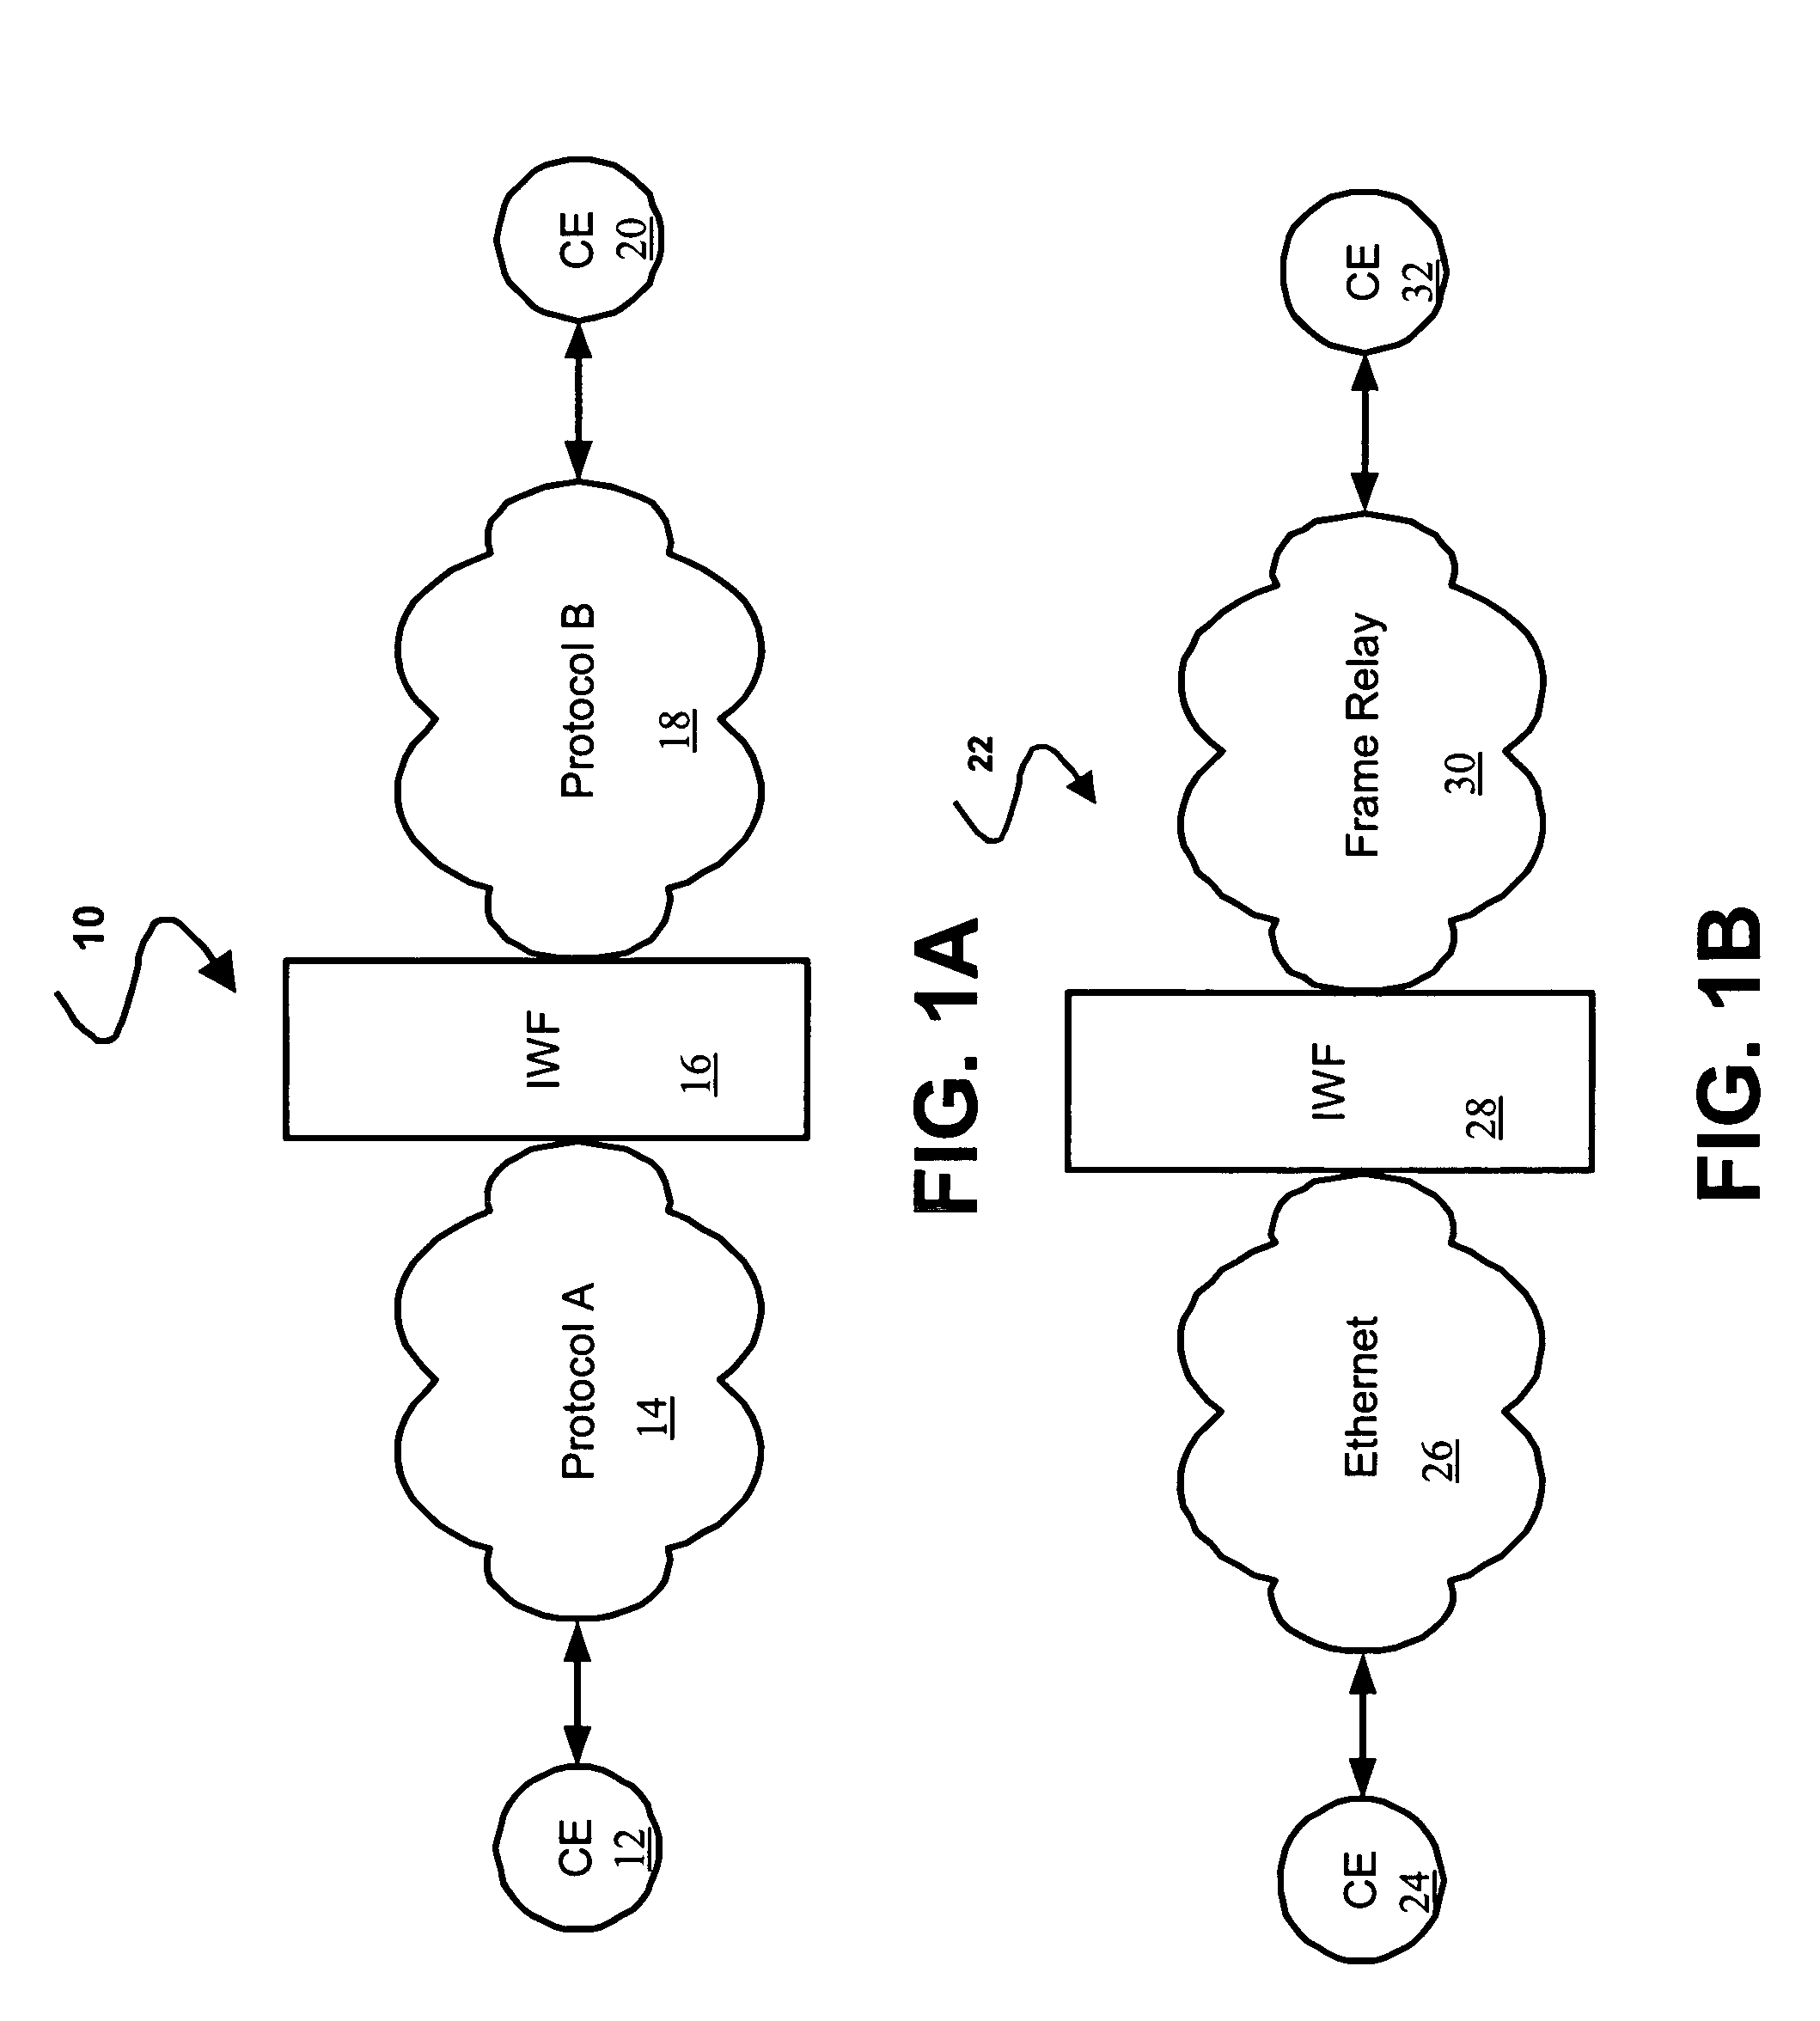 Method and system for frame relay and Ethernet service interworking